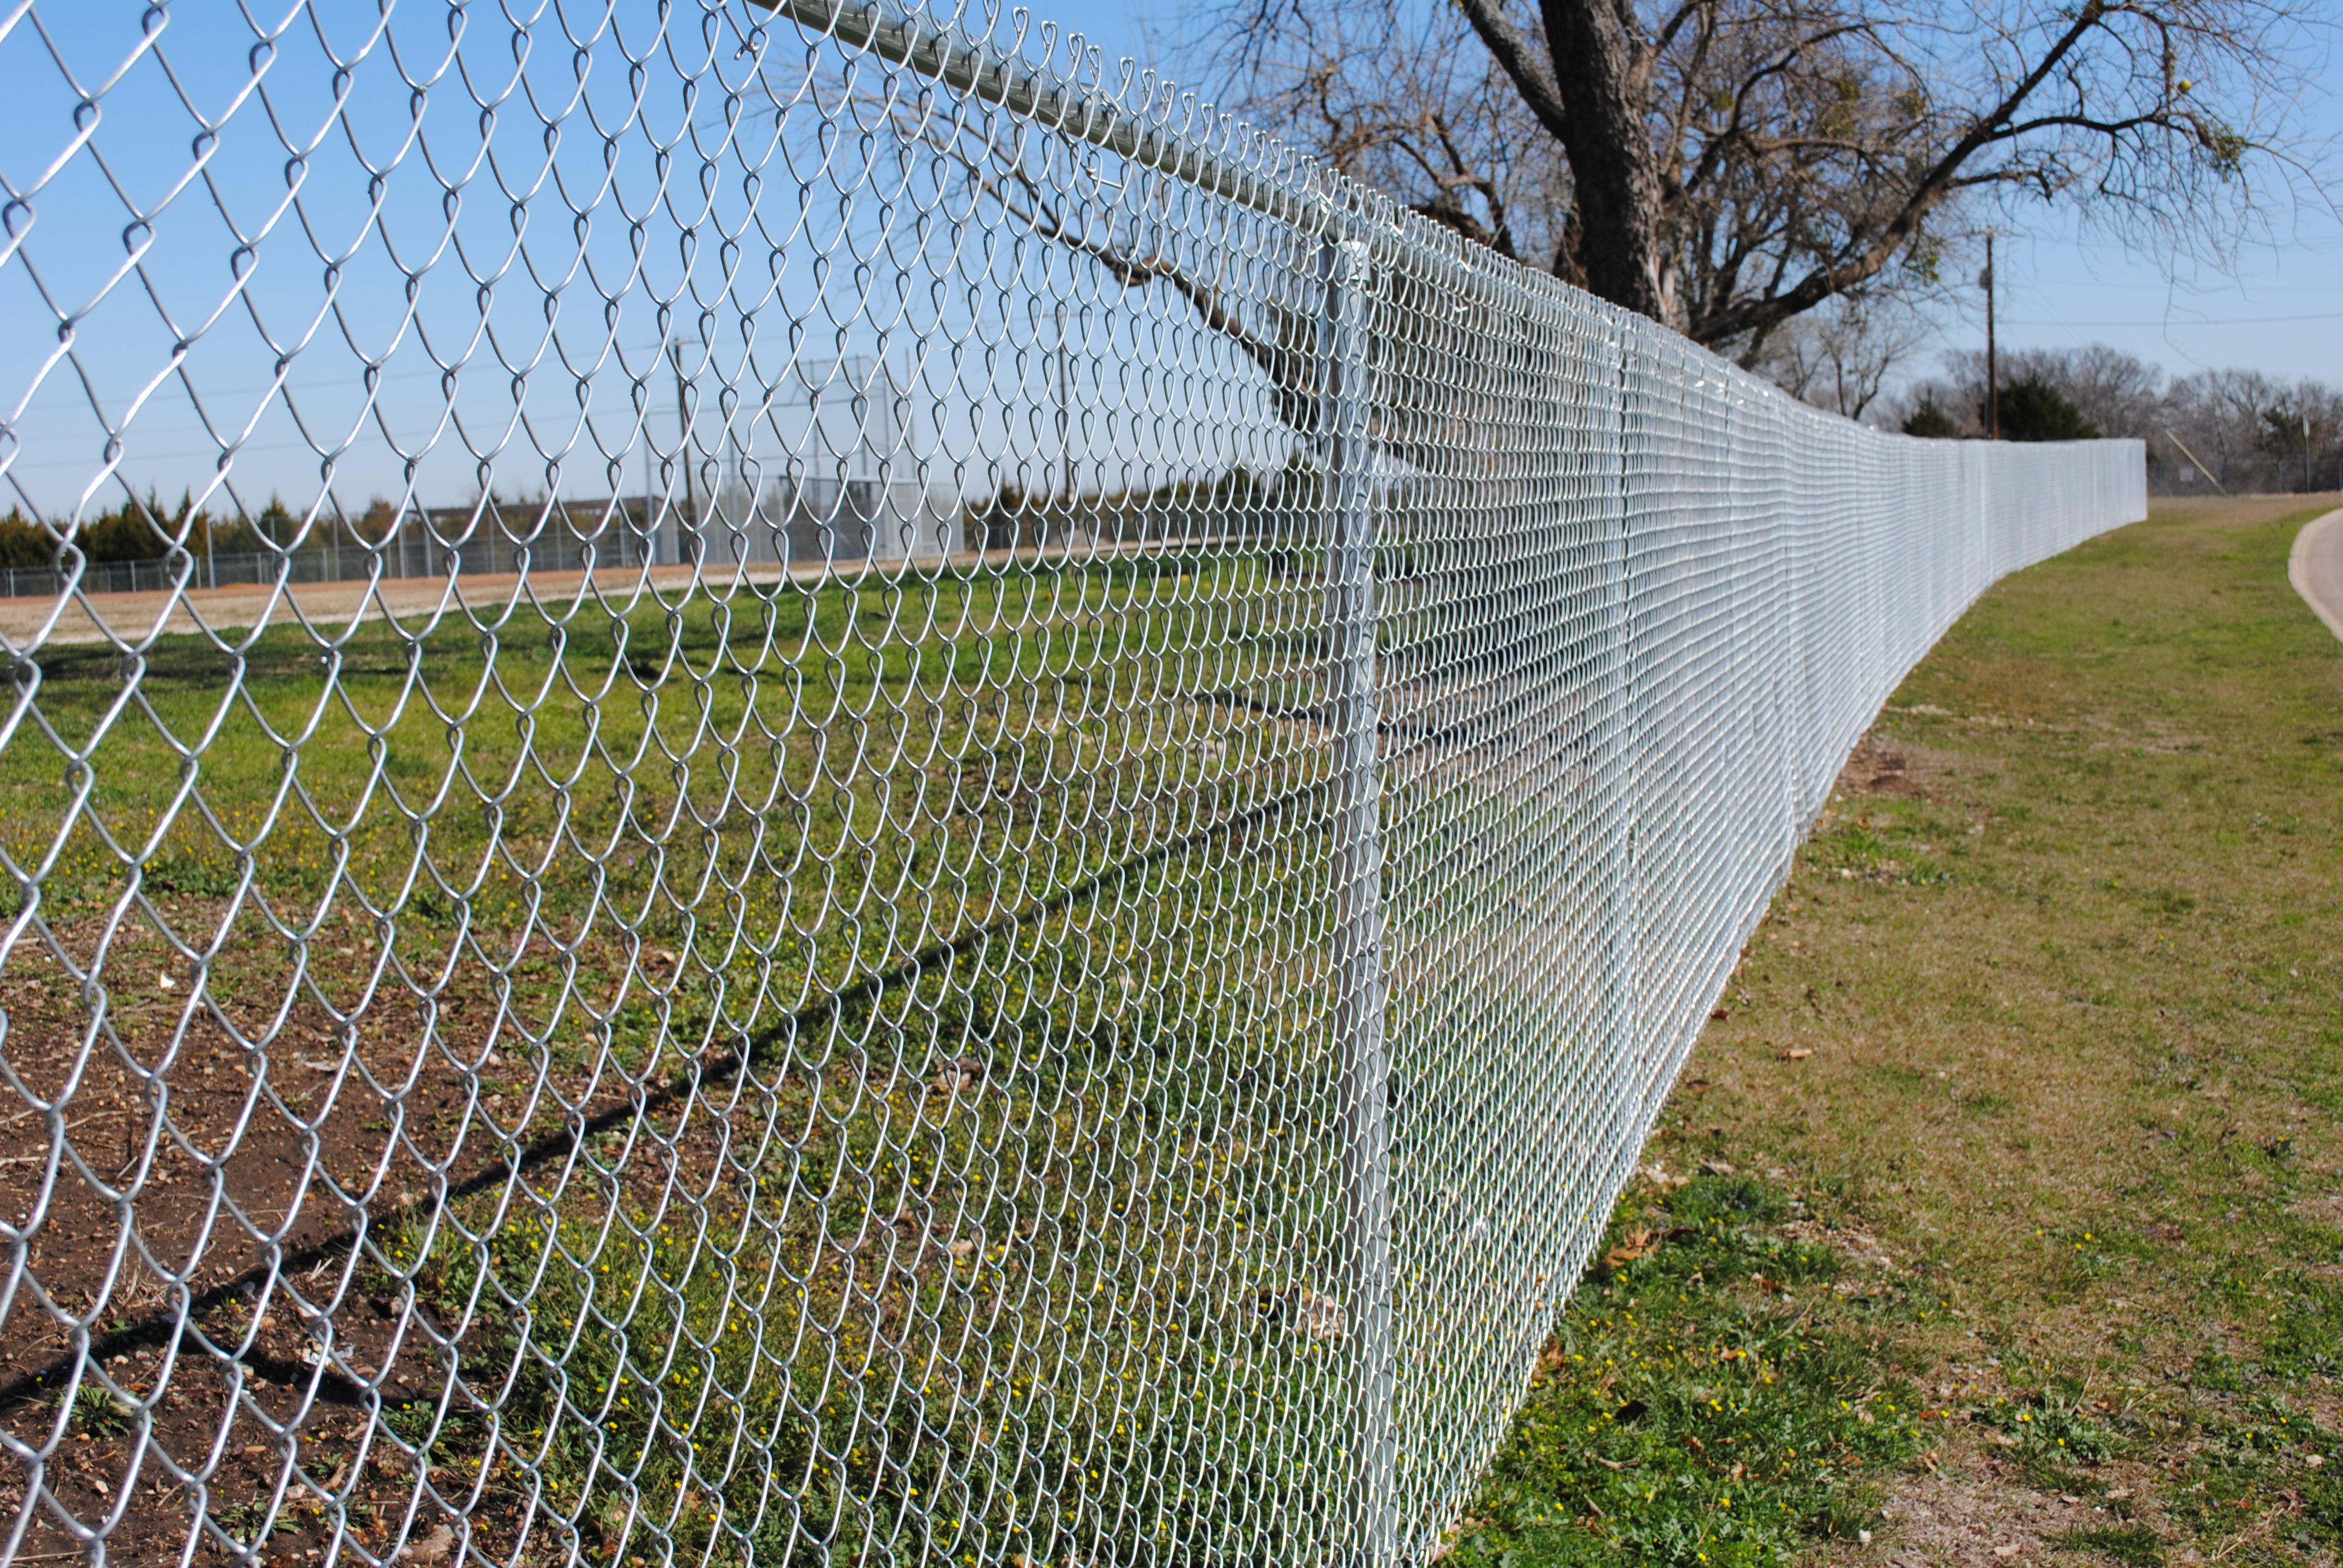 The Majority of Ordinary Soldiers in the Fence--Chain Link Fence